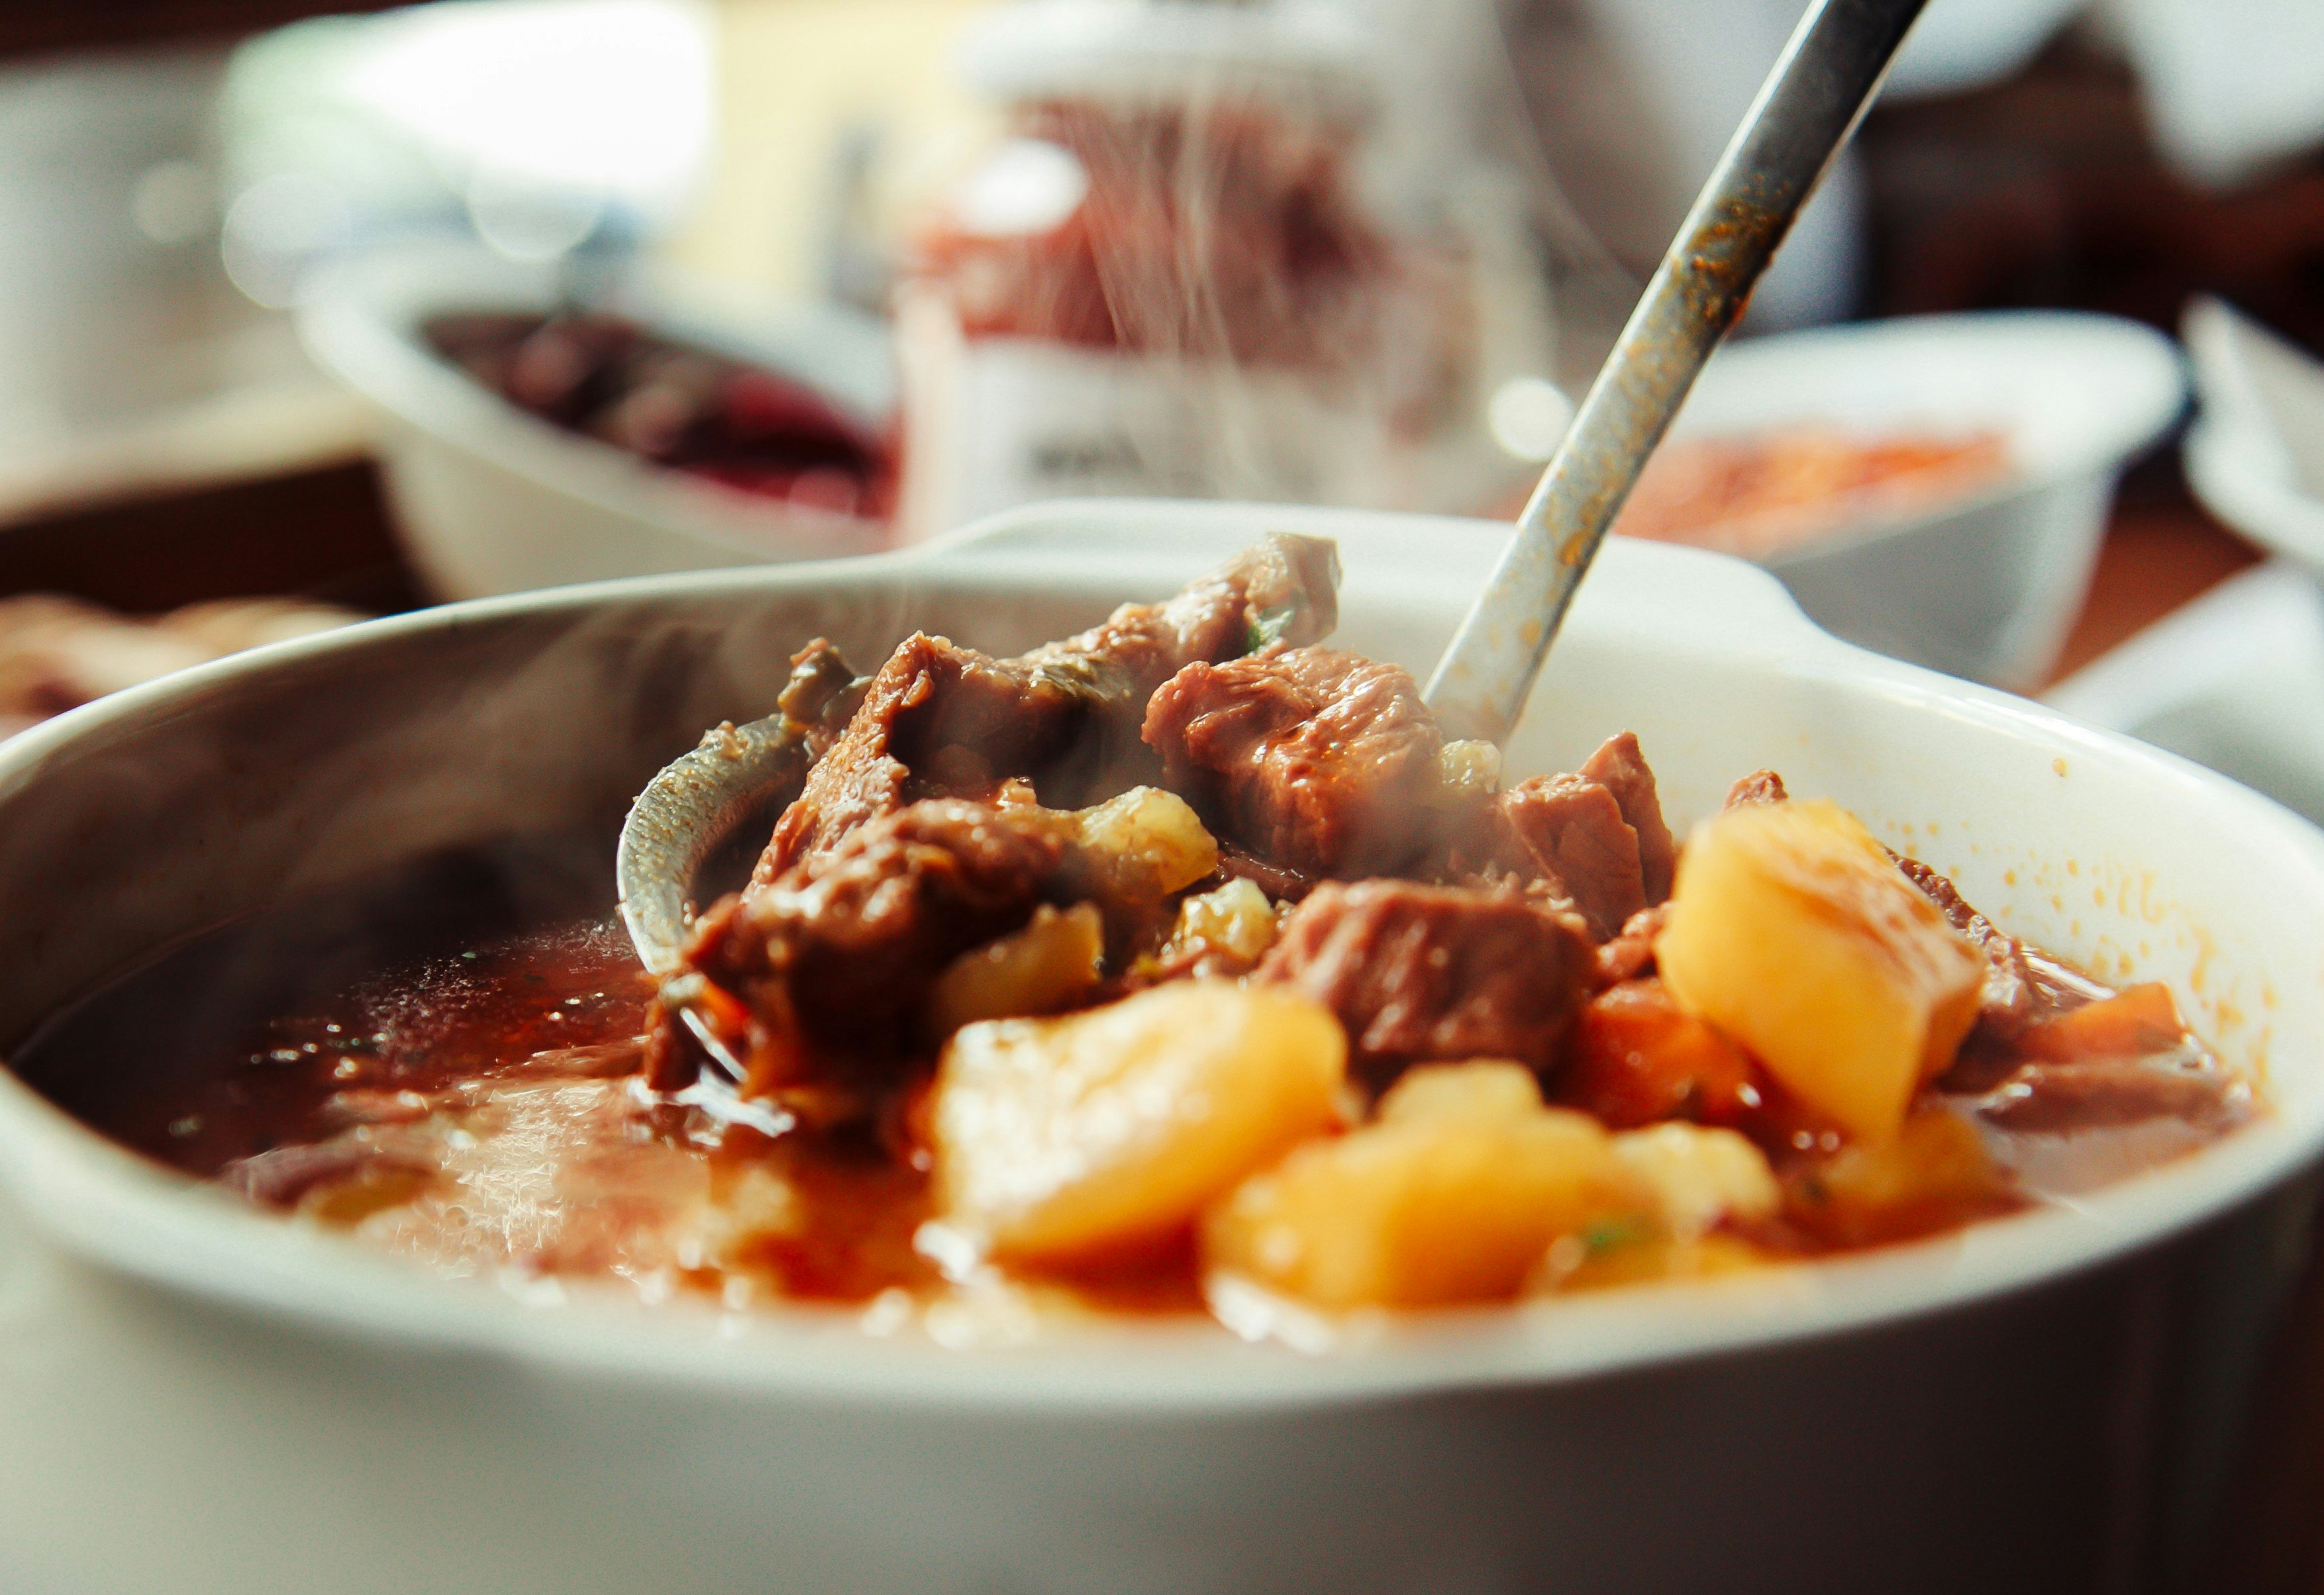 A close-up shot of a metal ladle being dipped into a large bowl of goulash, which appears like a reddish-brown soup with chunks of meat in it.